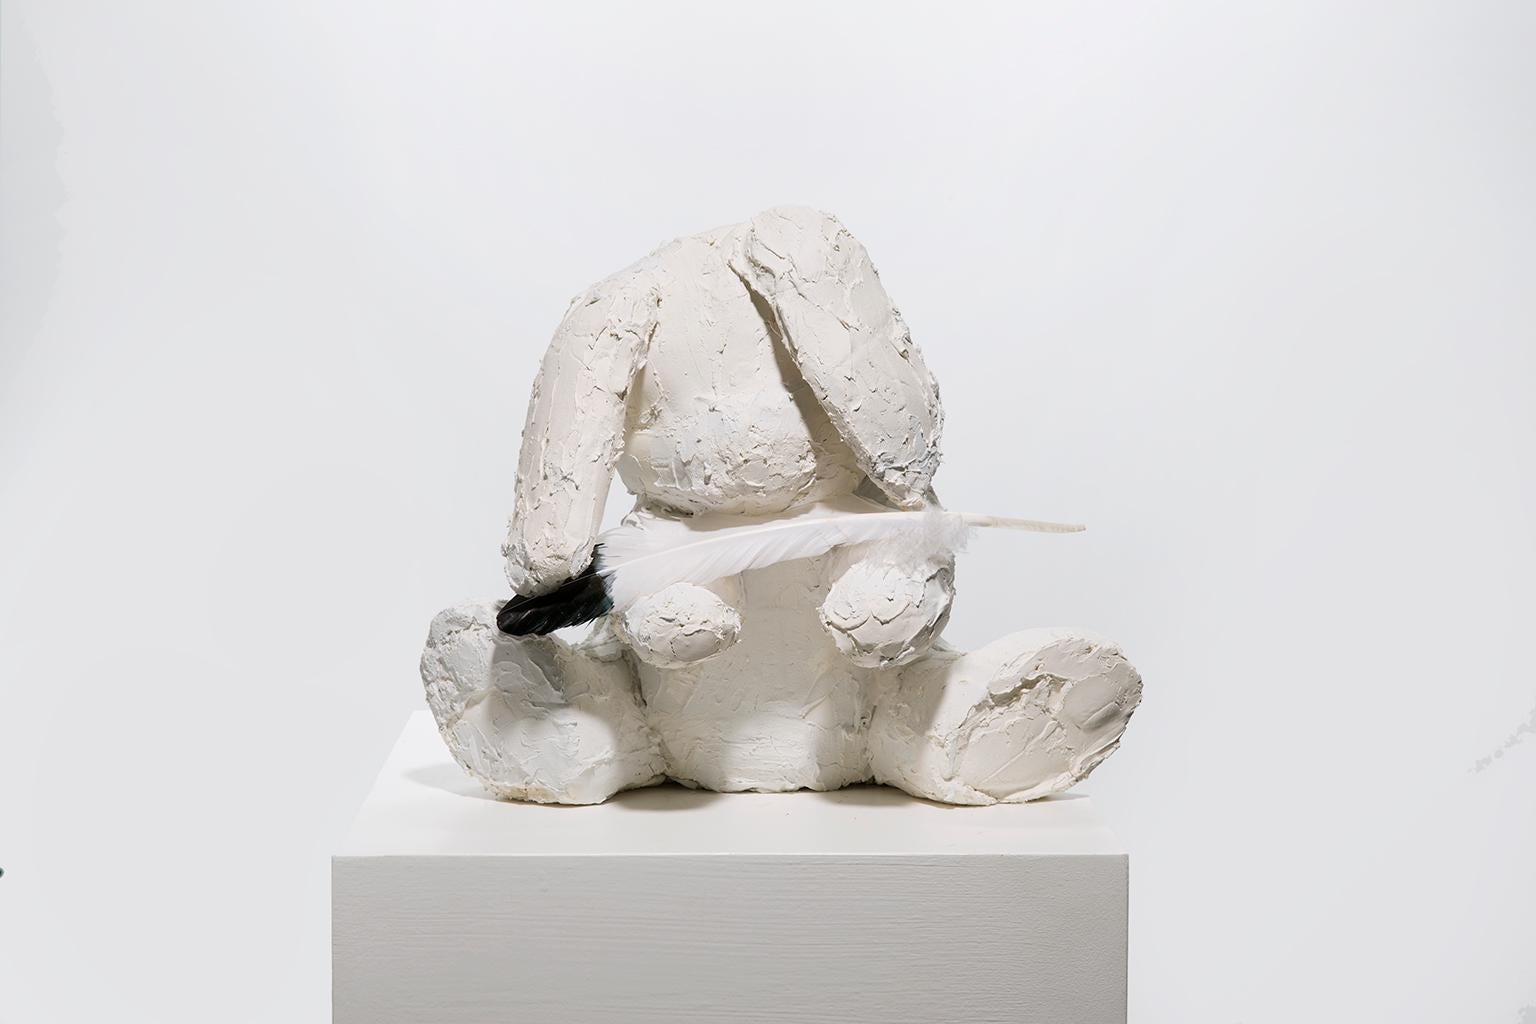 Ivy Naté Figurative Sculpture - Sculpture of Bunny with feather: 'Bunny with Feather'